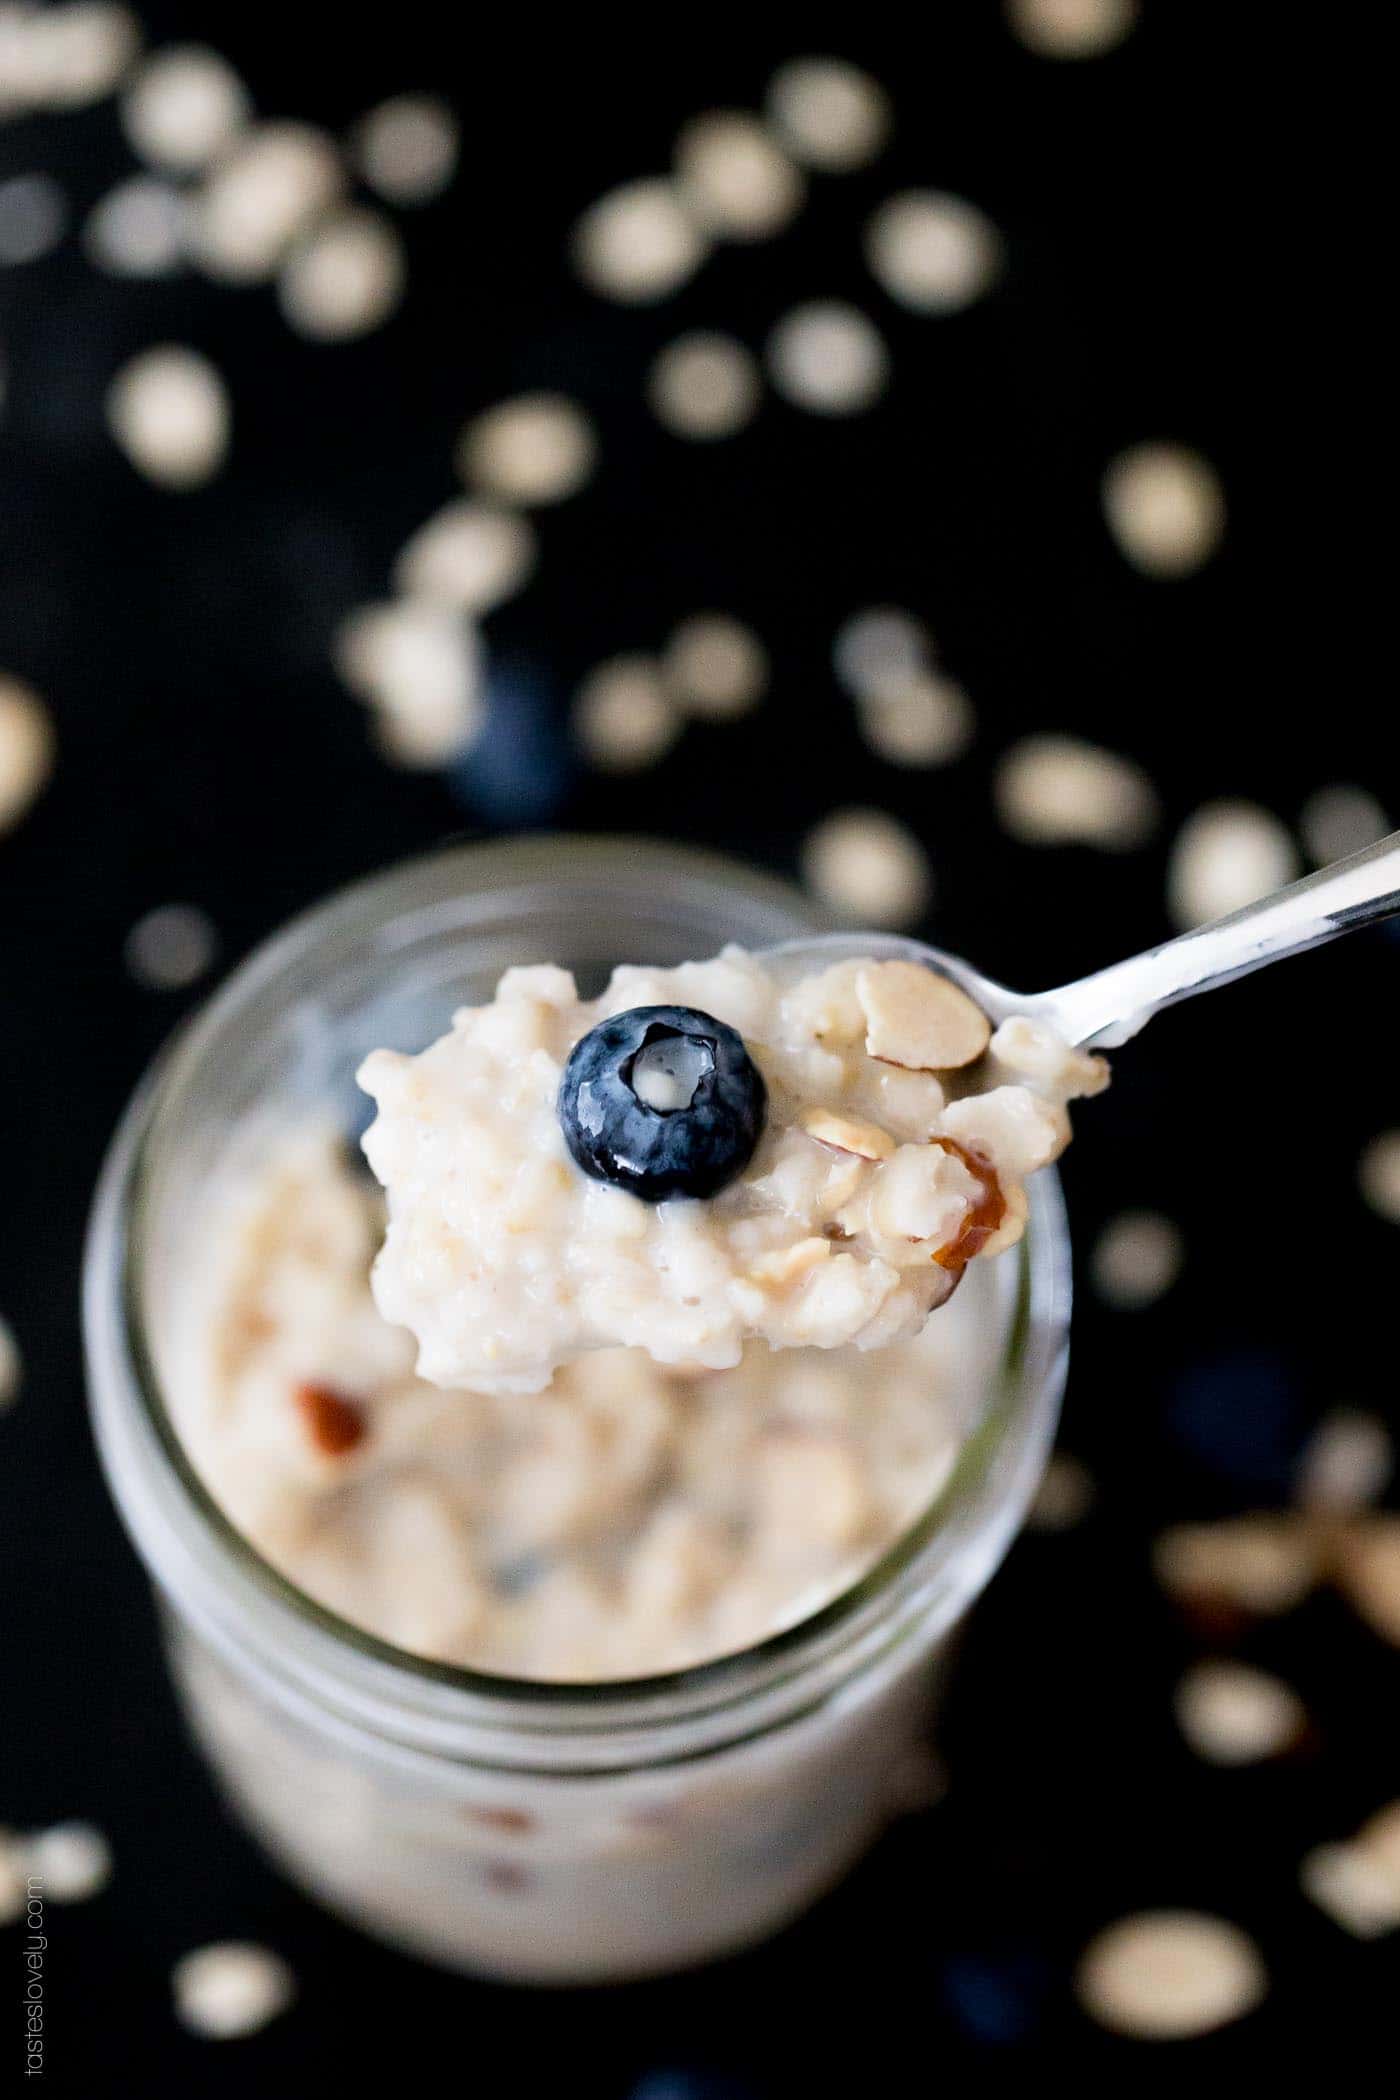 a closeup photo of a silver spoon with holding blueberry overnight oats over a glass jar